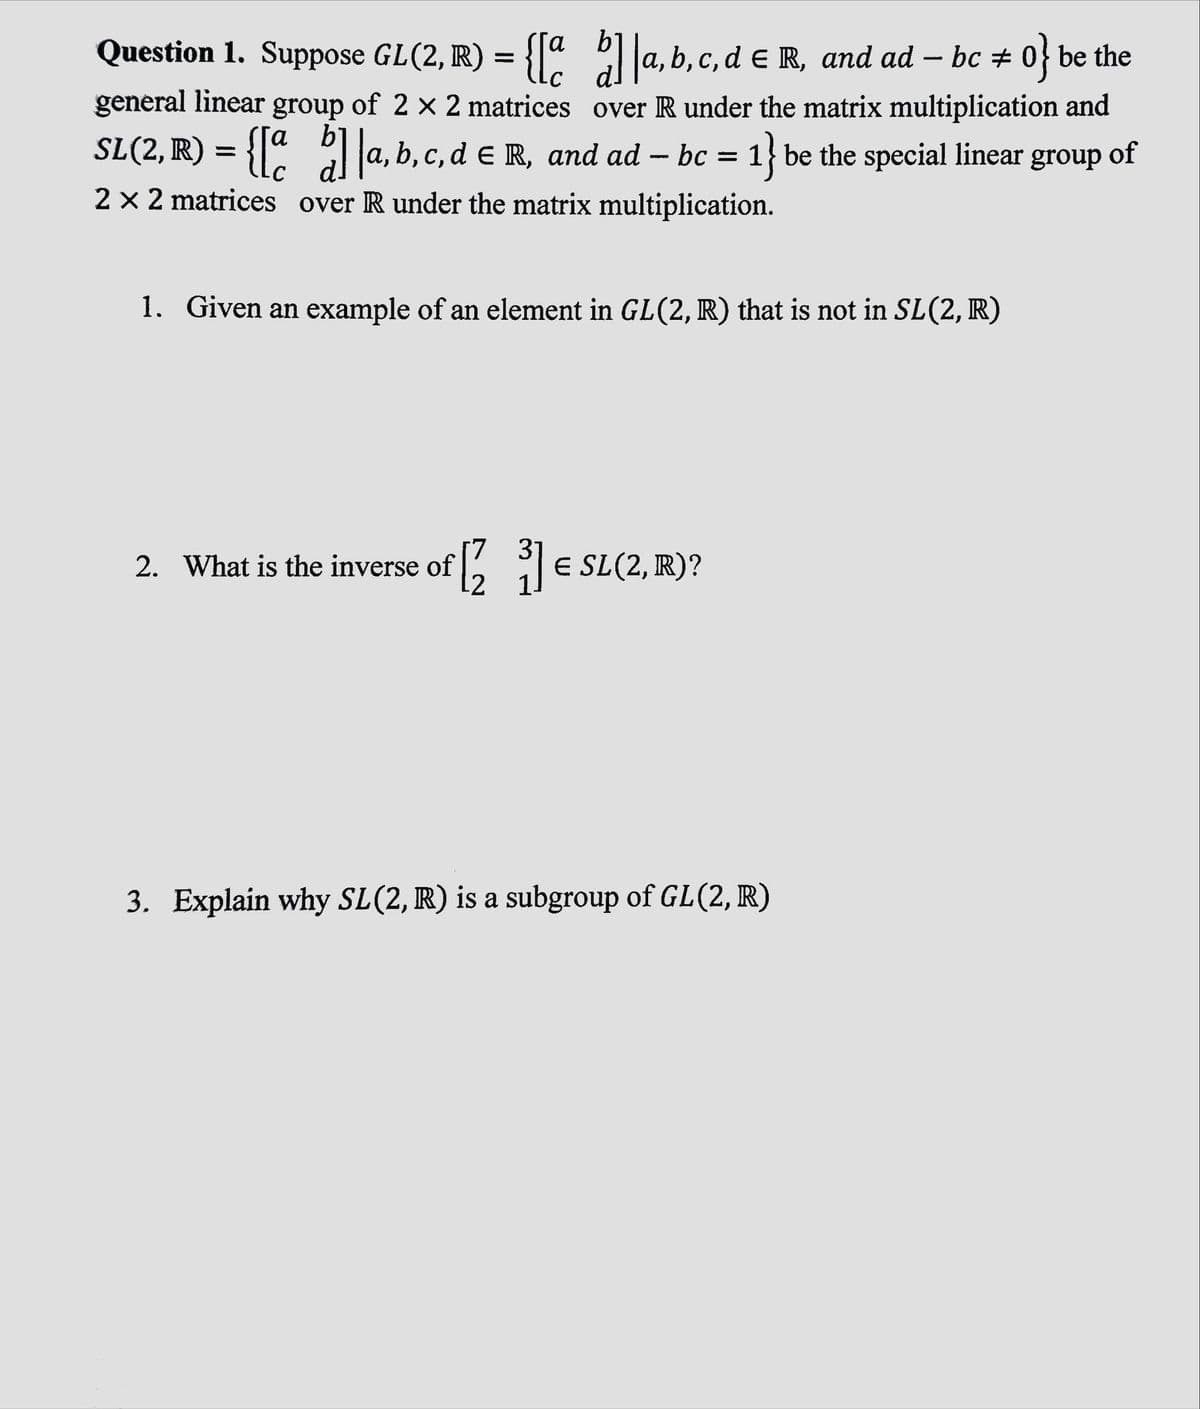 Question 1. Suppose GL(2, R) = {[a b]|a, b, c, d € R, and ad — bc # 0} be the
—
-
general linear group of 2 × 2 matrices over R under the matrix multiplication and
SL (2, R) = {[a b] a, b, c, d € R, and ad — bc = 1} be the special linear group of
-
2 × 2 matrices over R under the matrix multiplication.
1. Given an example of an element in GL(2, R) that is not in SL(2, R)
2. What is the inverse of
[7 31
[2³] € SL (2, R)?
3. Explain why SL(2, R) is a subgroup of GL(2, R)